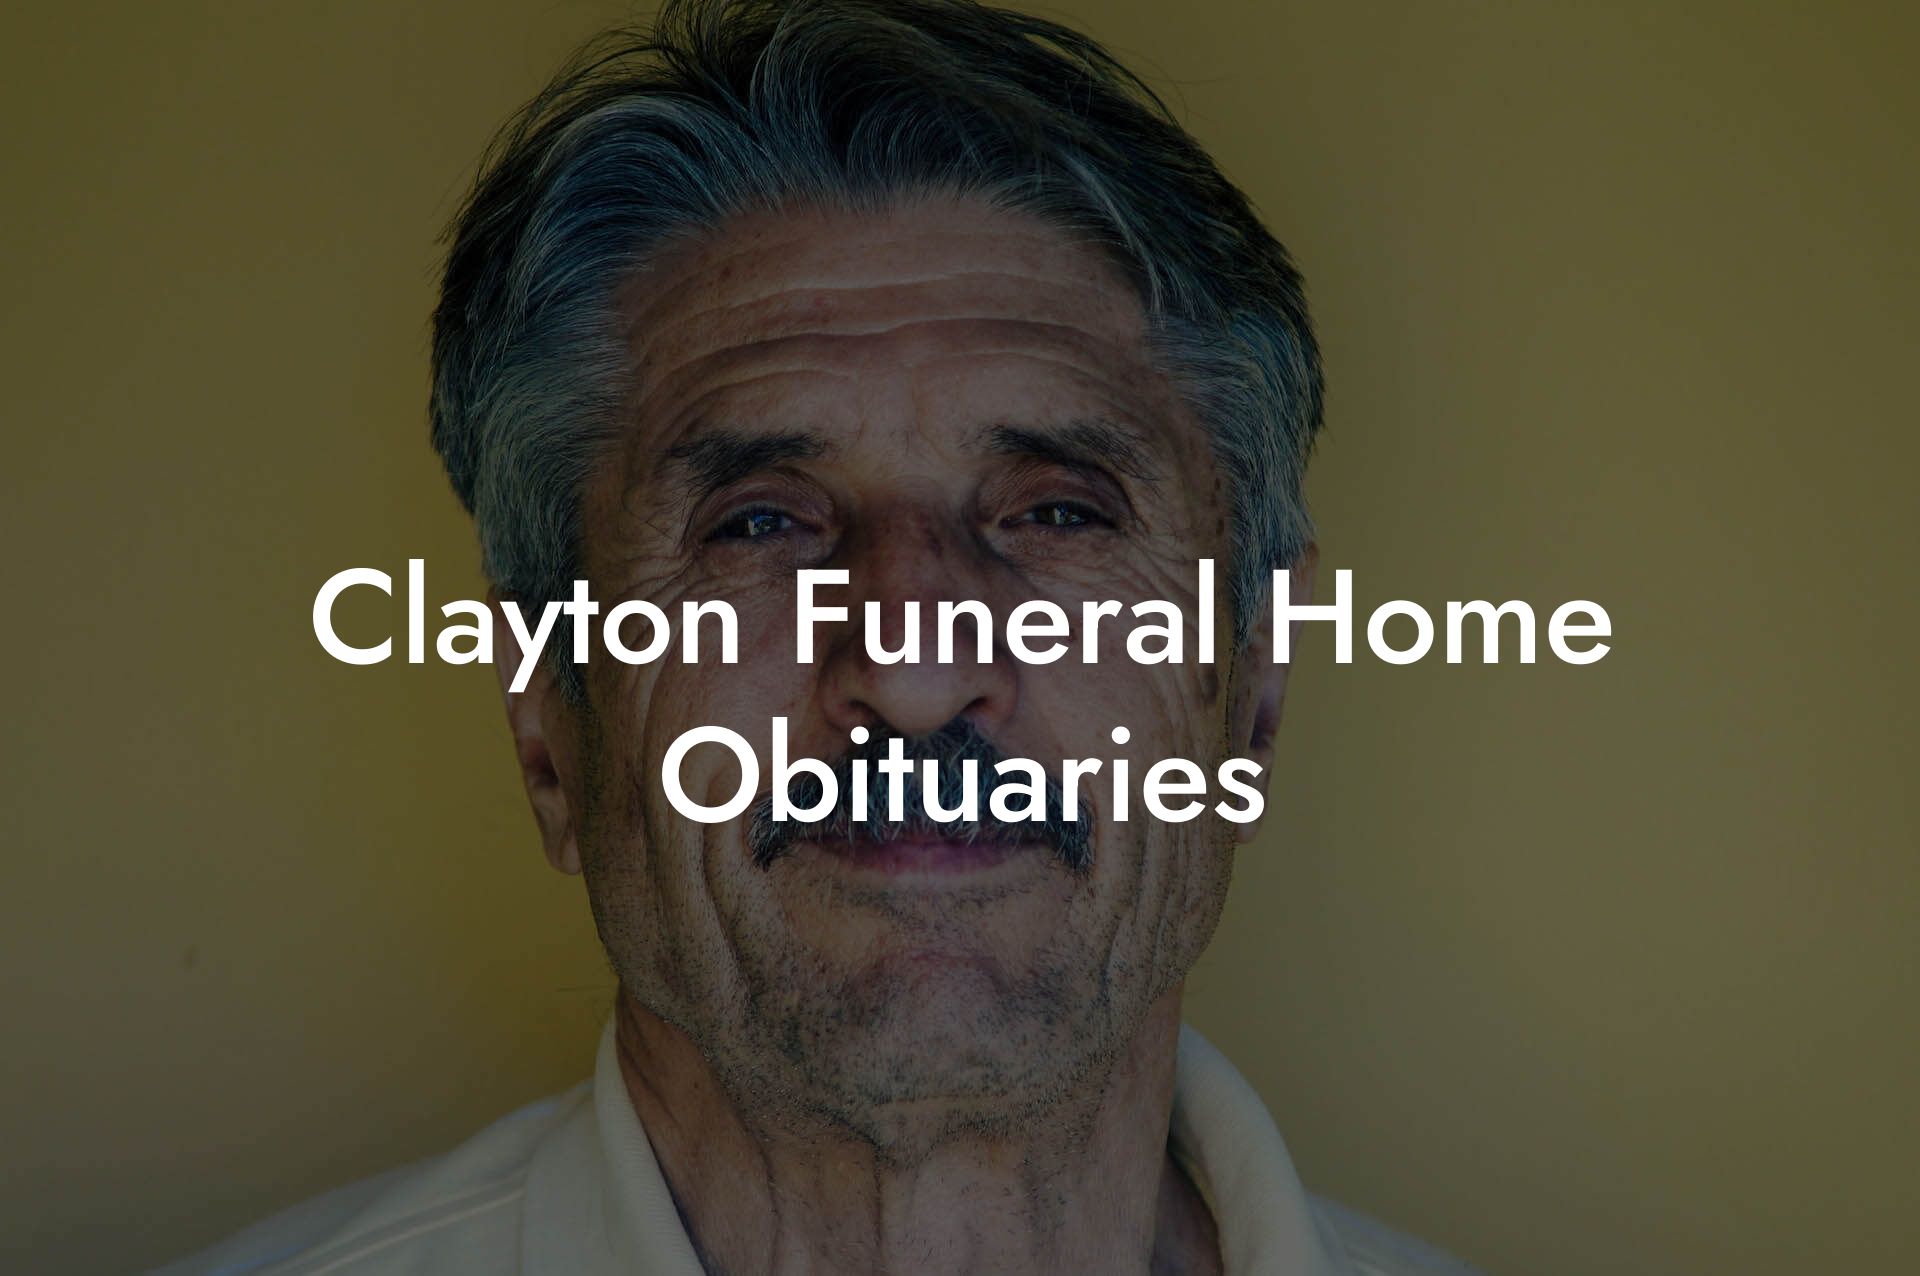 Clayton Funeral Home Obituaries